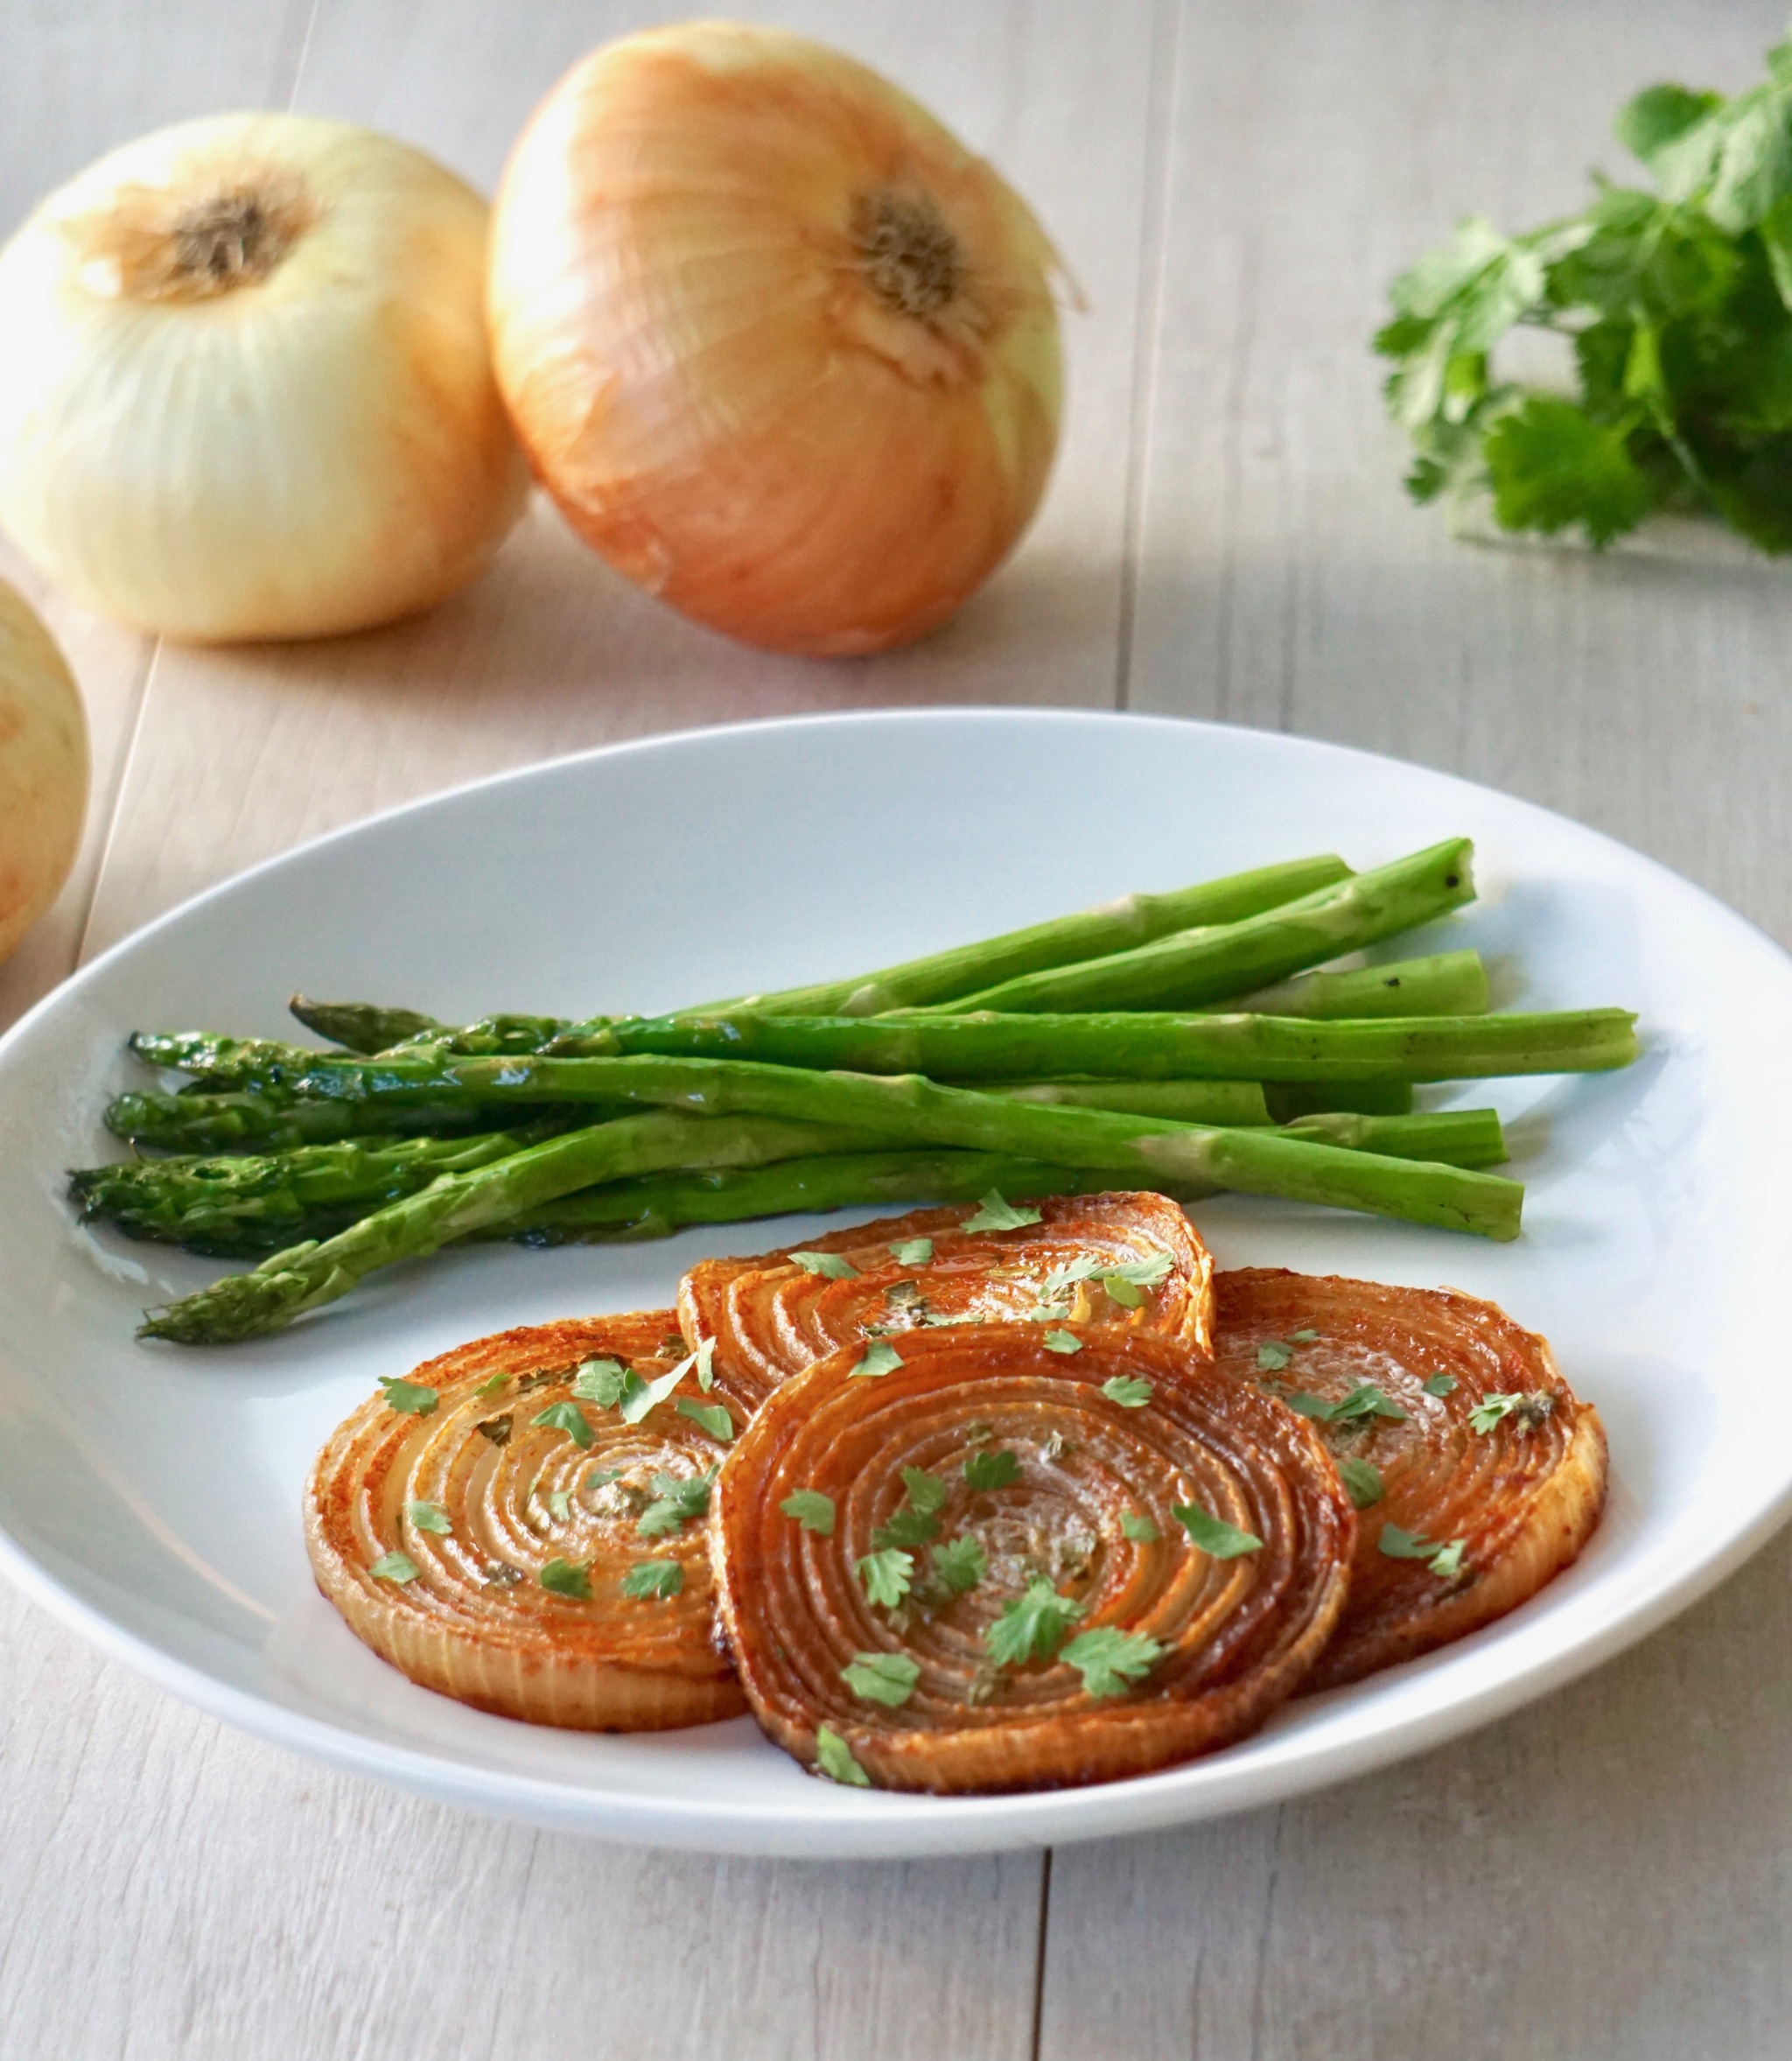 Slow-Roasted Onions